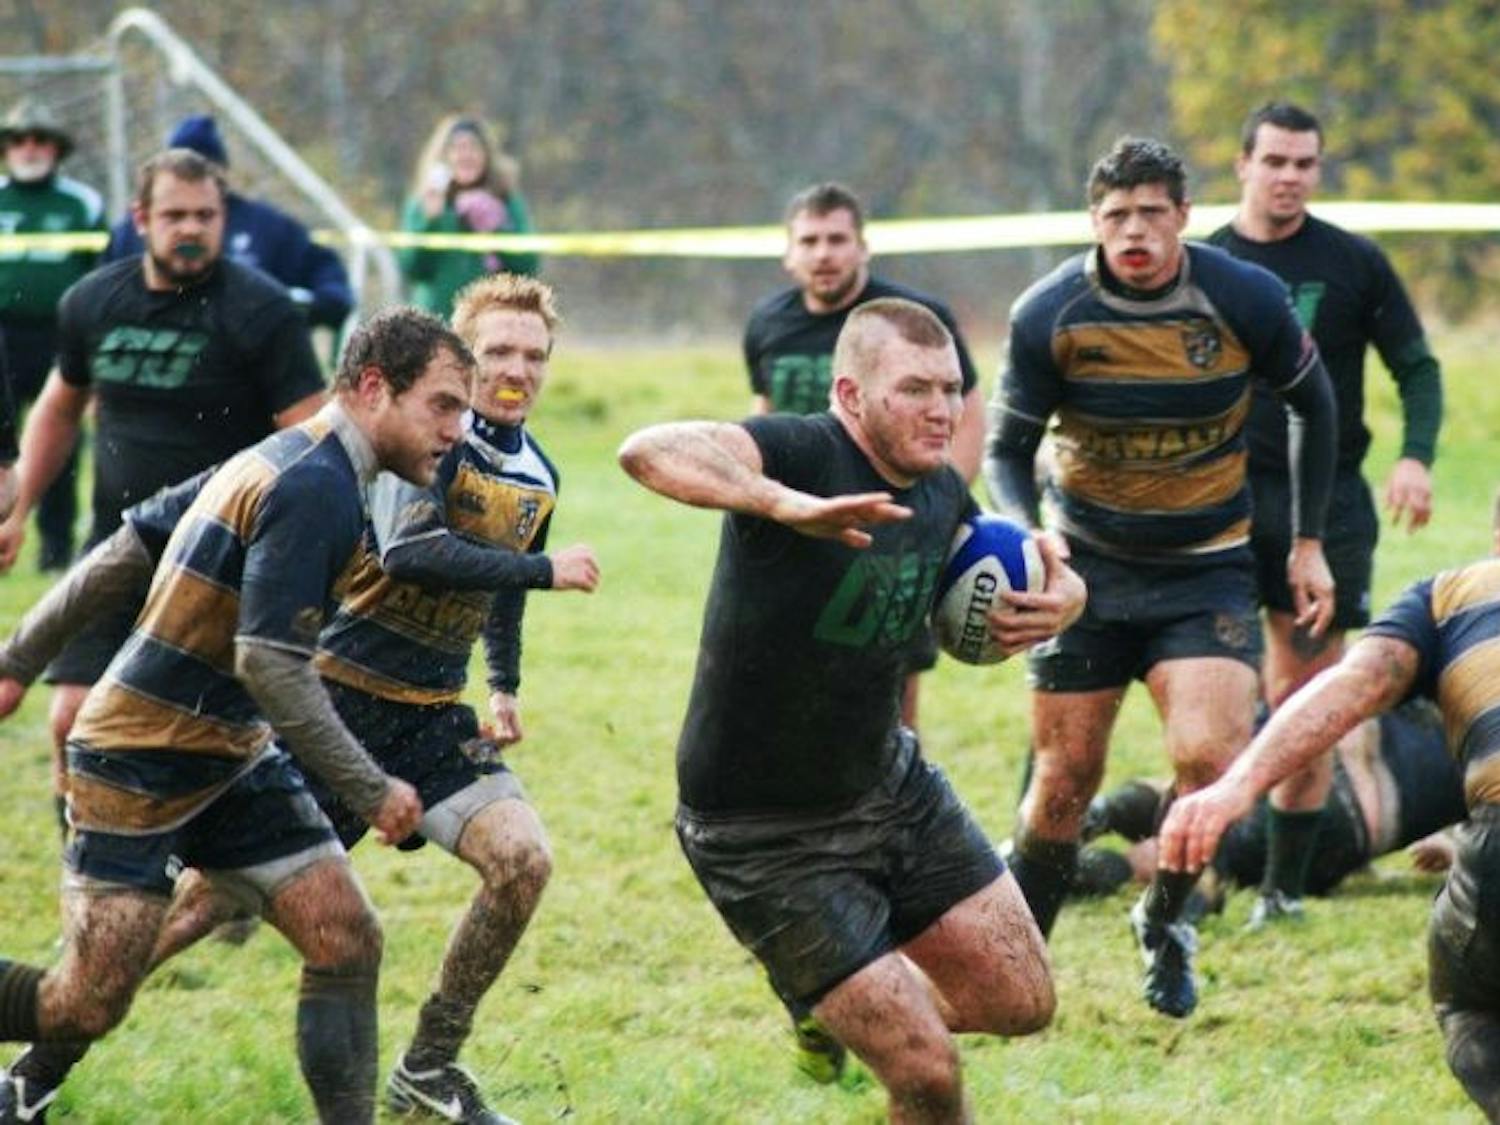 Rugby: Bobcats win twice over weekend, advance to semifinals  